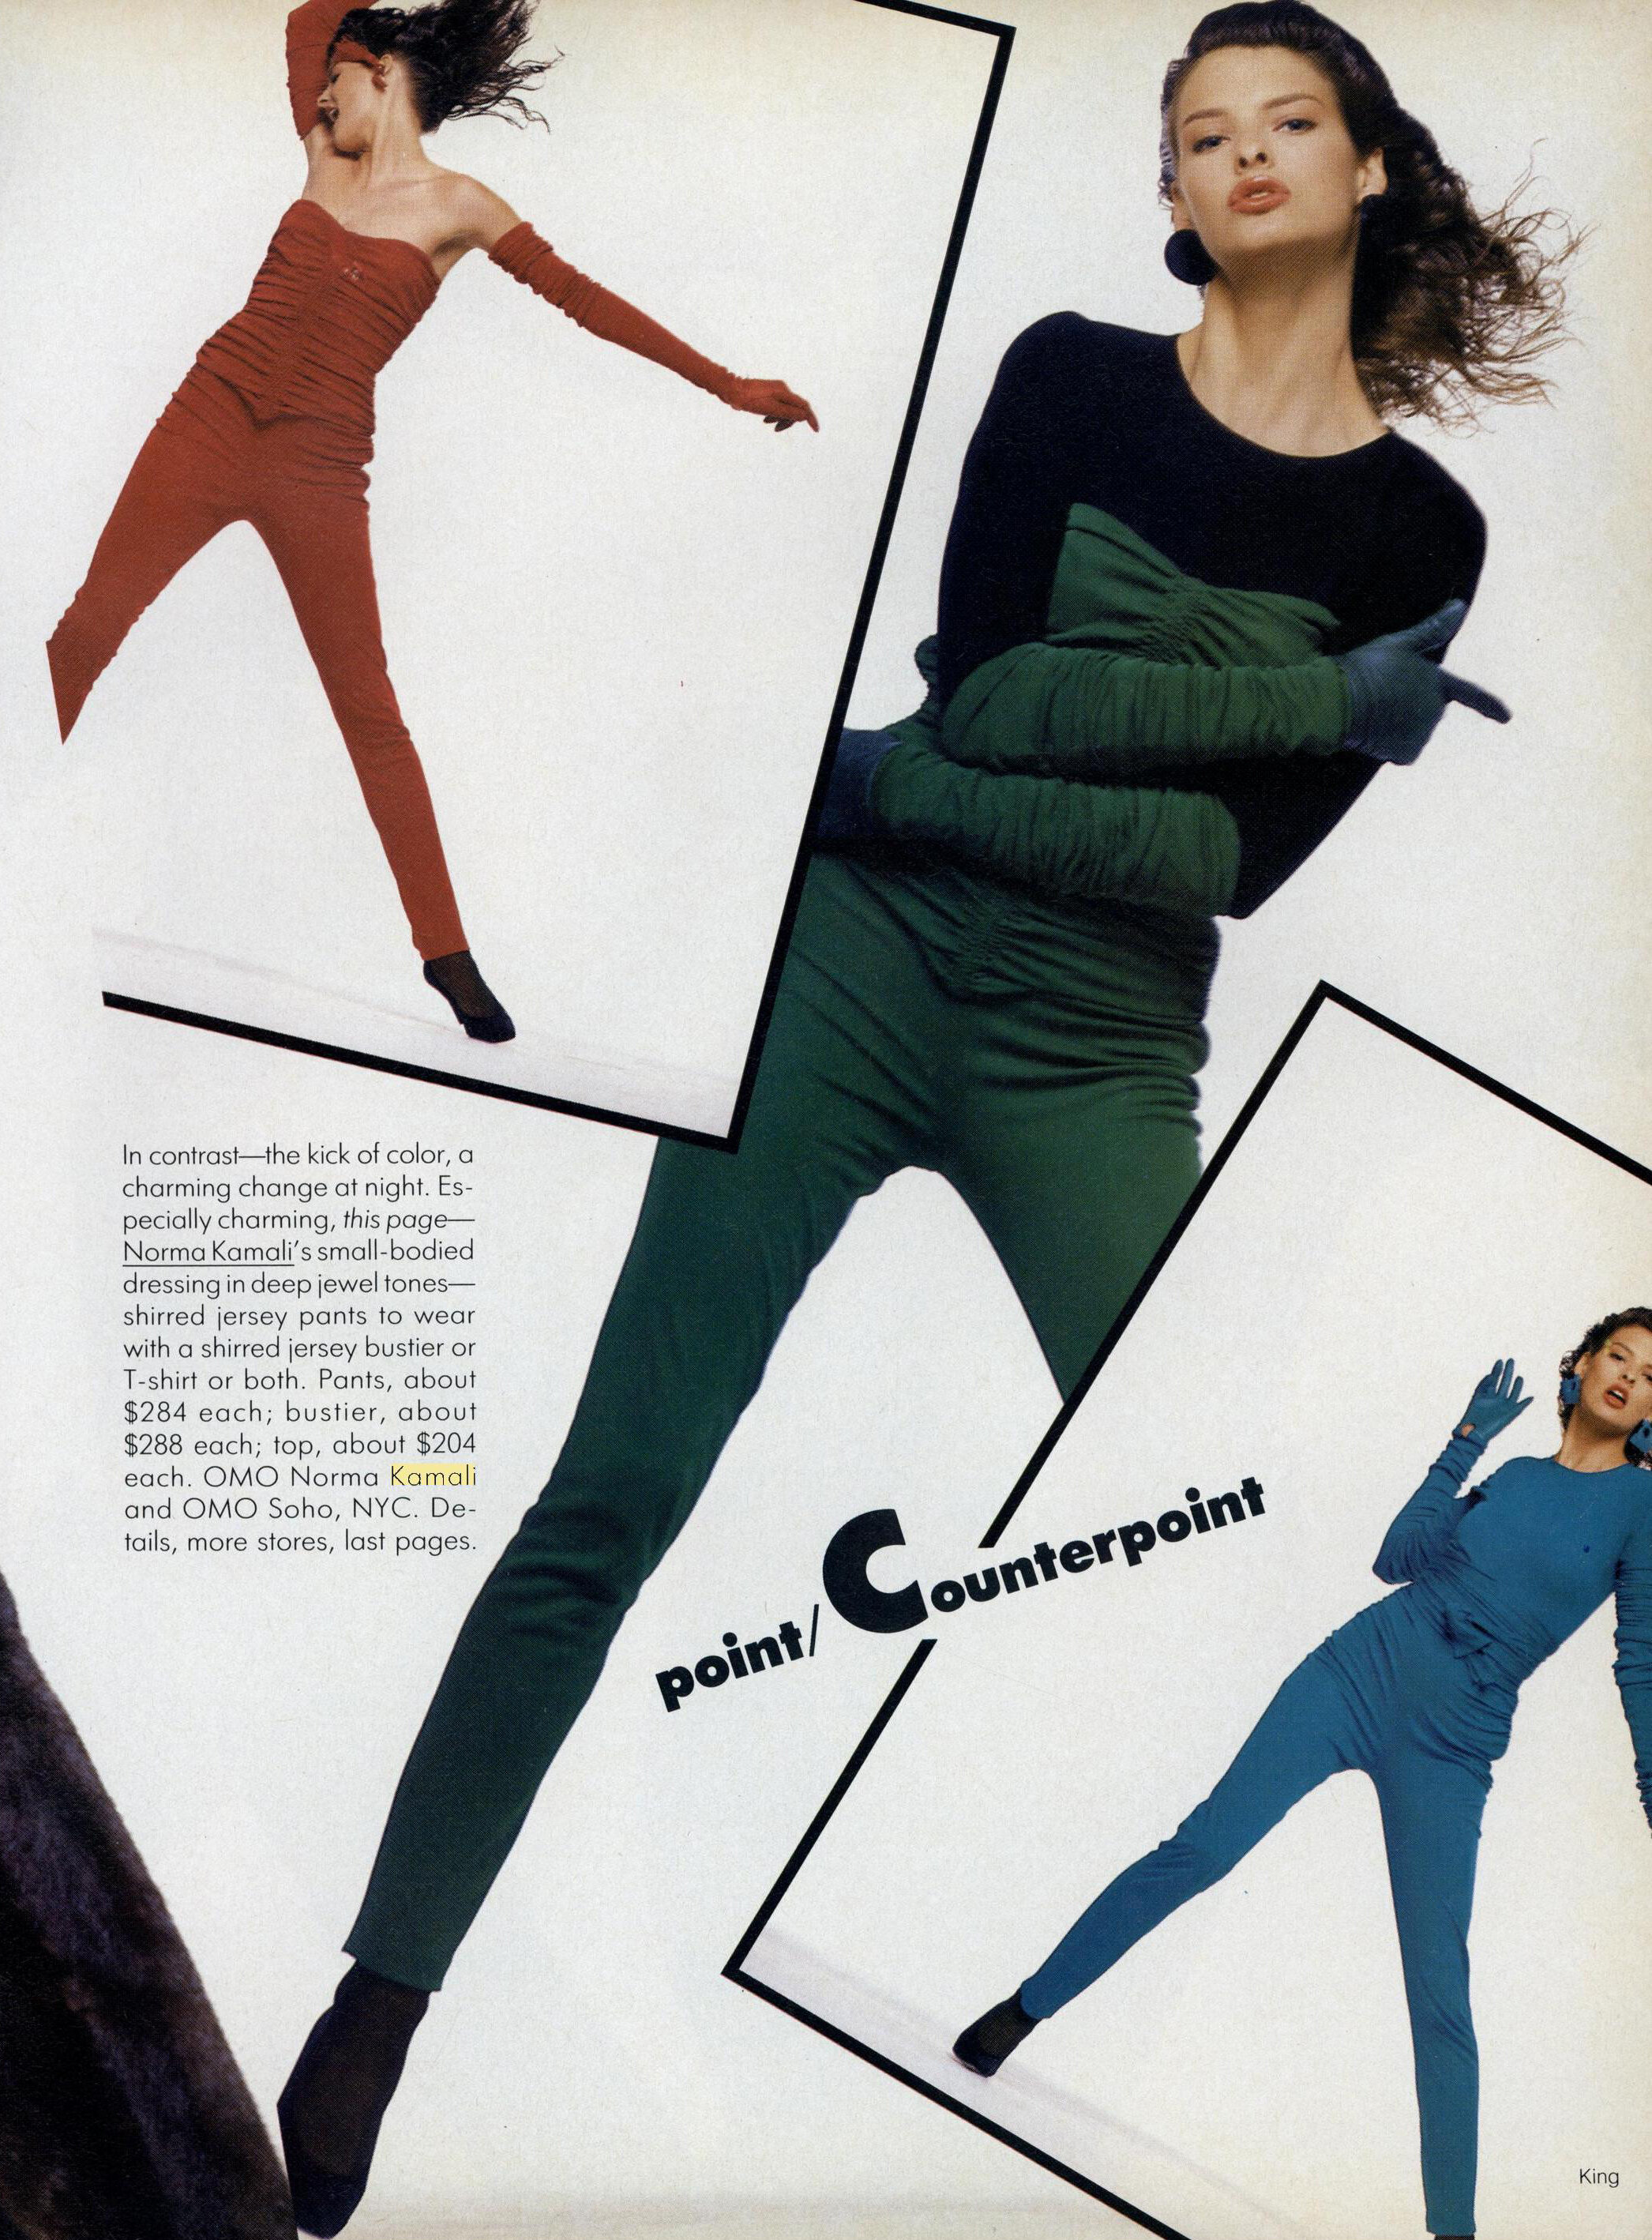 Jewel-tones Kamali tops and tight trousers. Photos by Bill King for Vogue, September 1987.